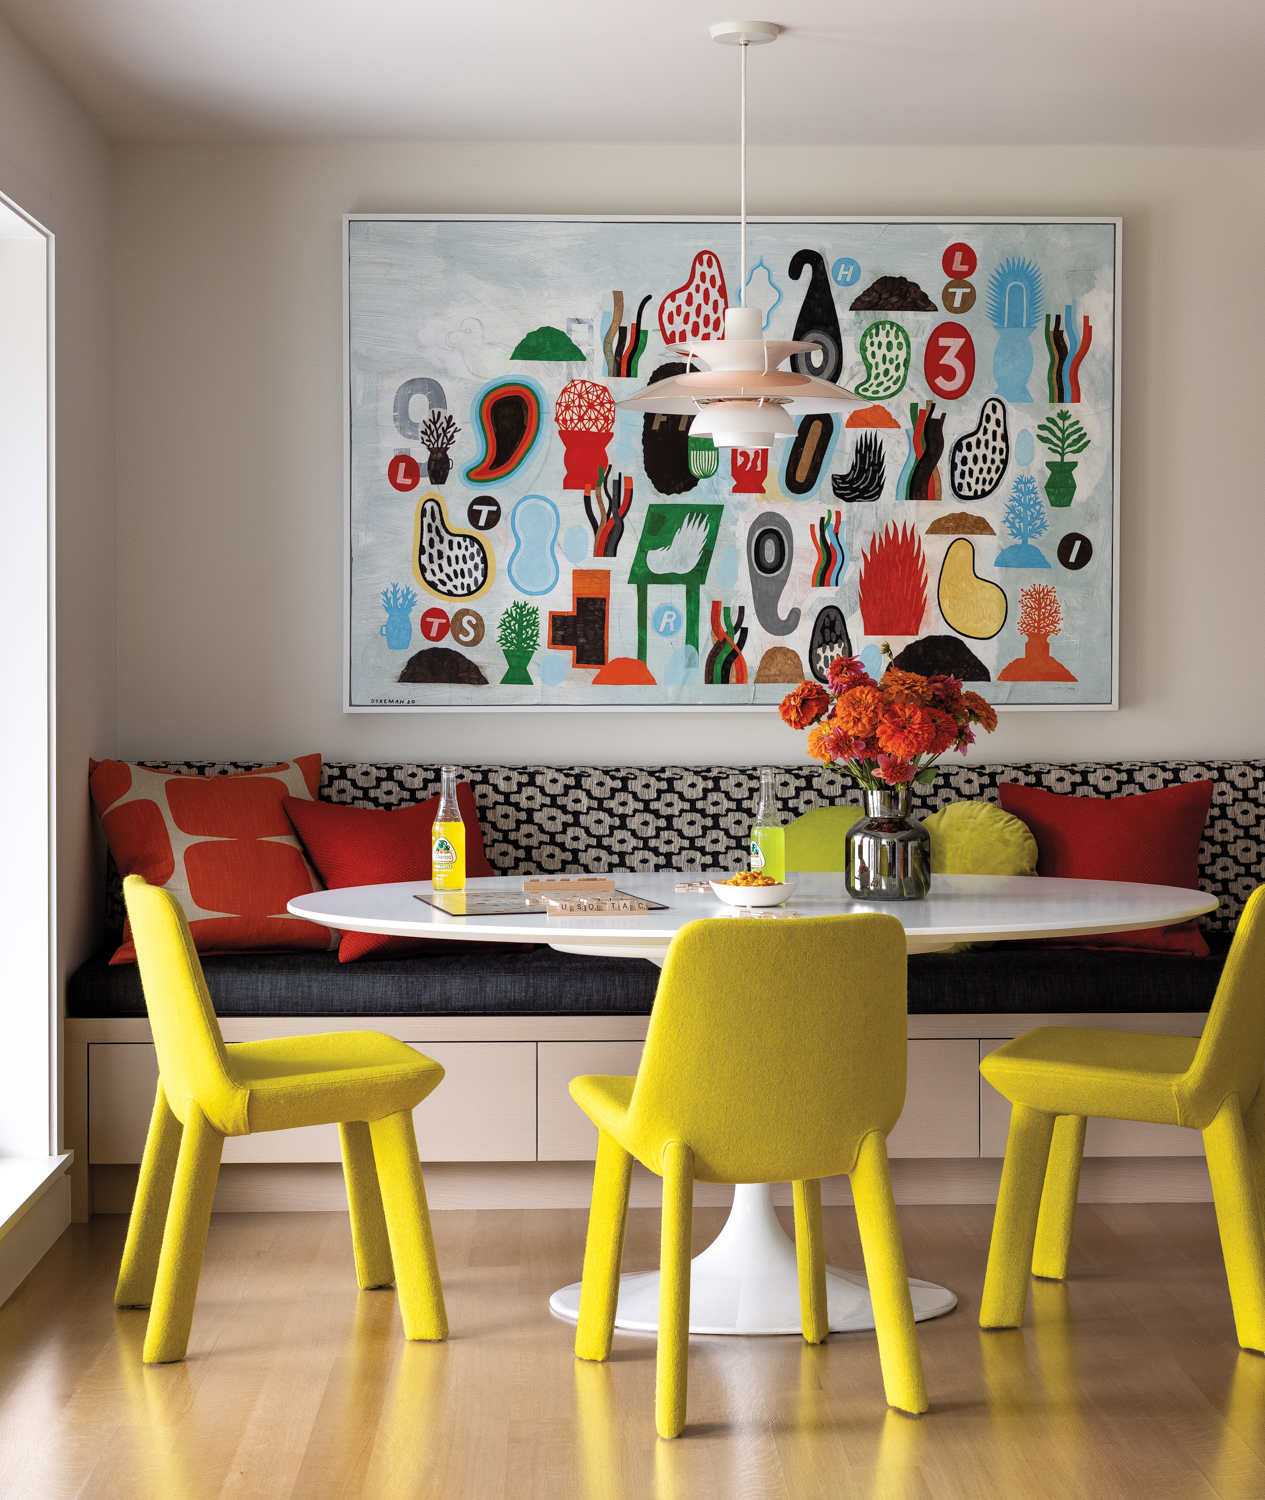 midcentury-modern breakfast nook with yellow chairs and banquette with colorful art